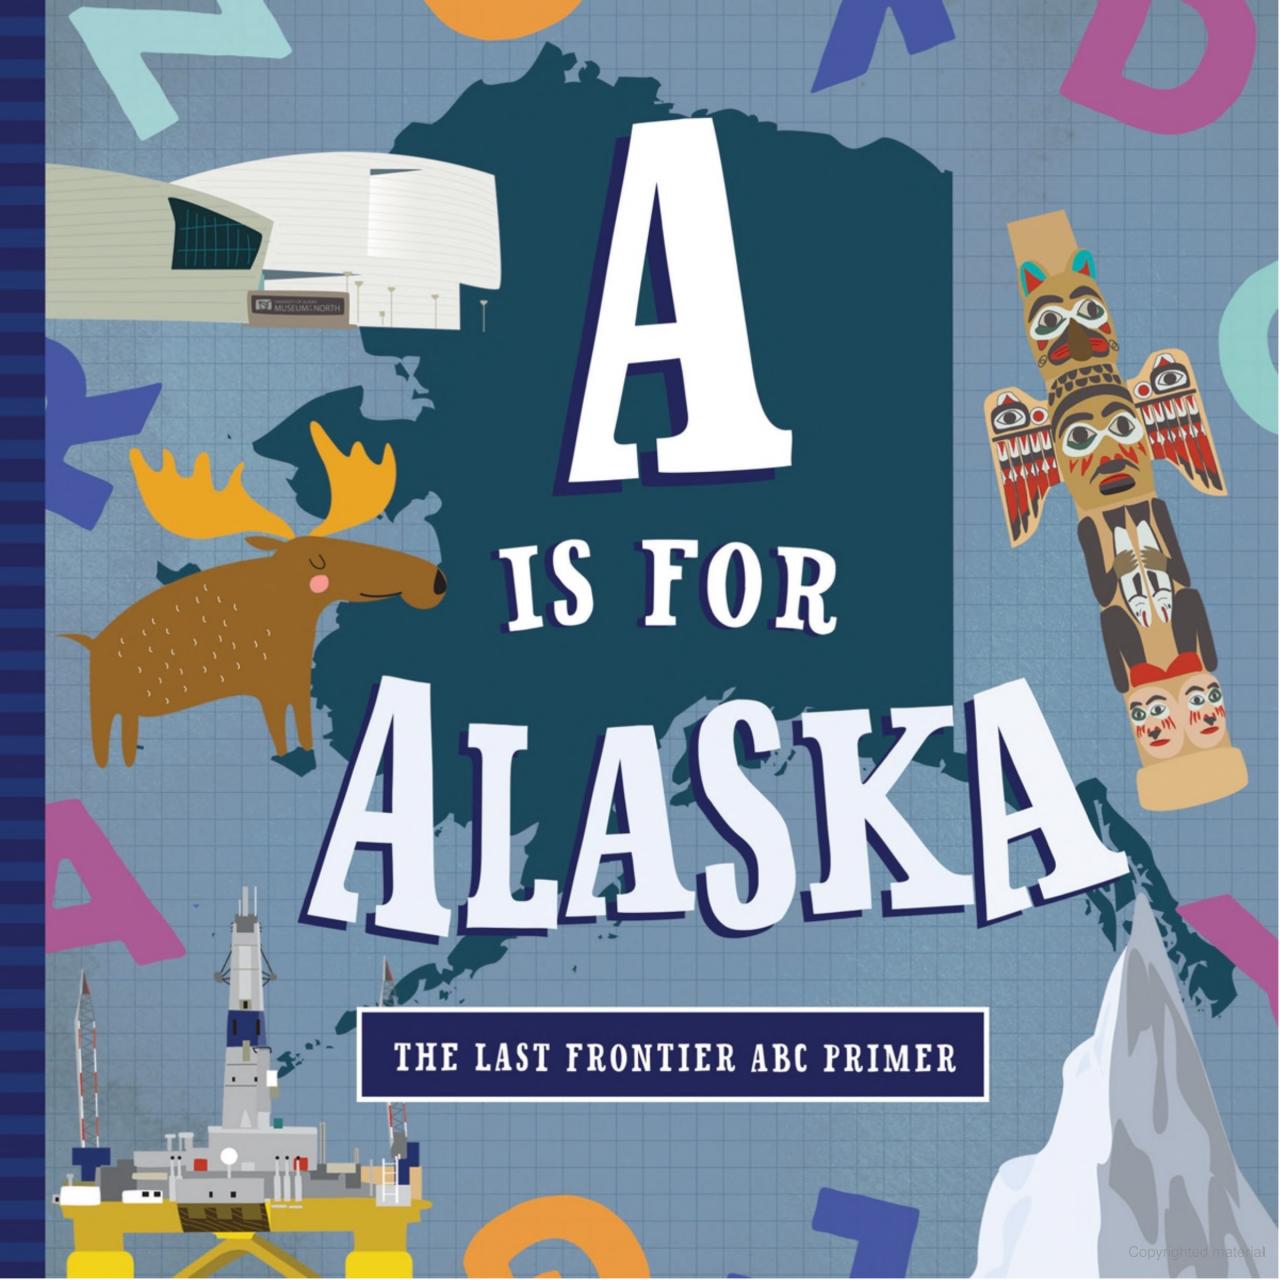 A is for Alaska by Trish Madson and Volha Kaliaha